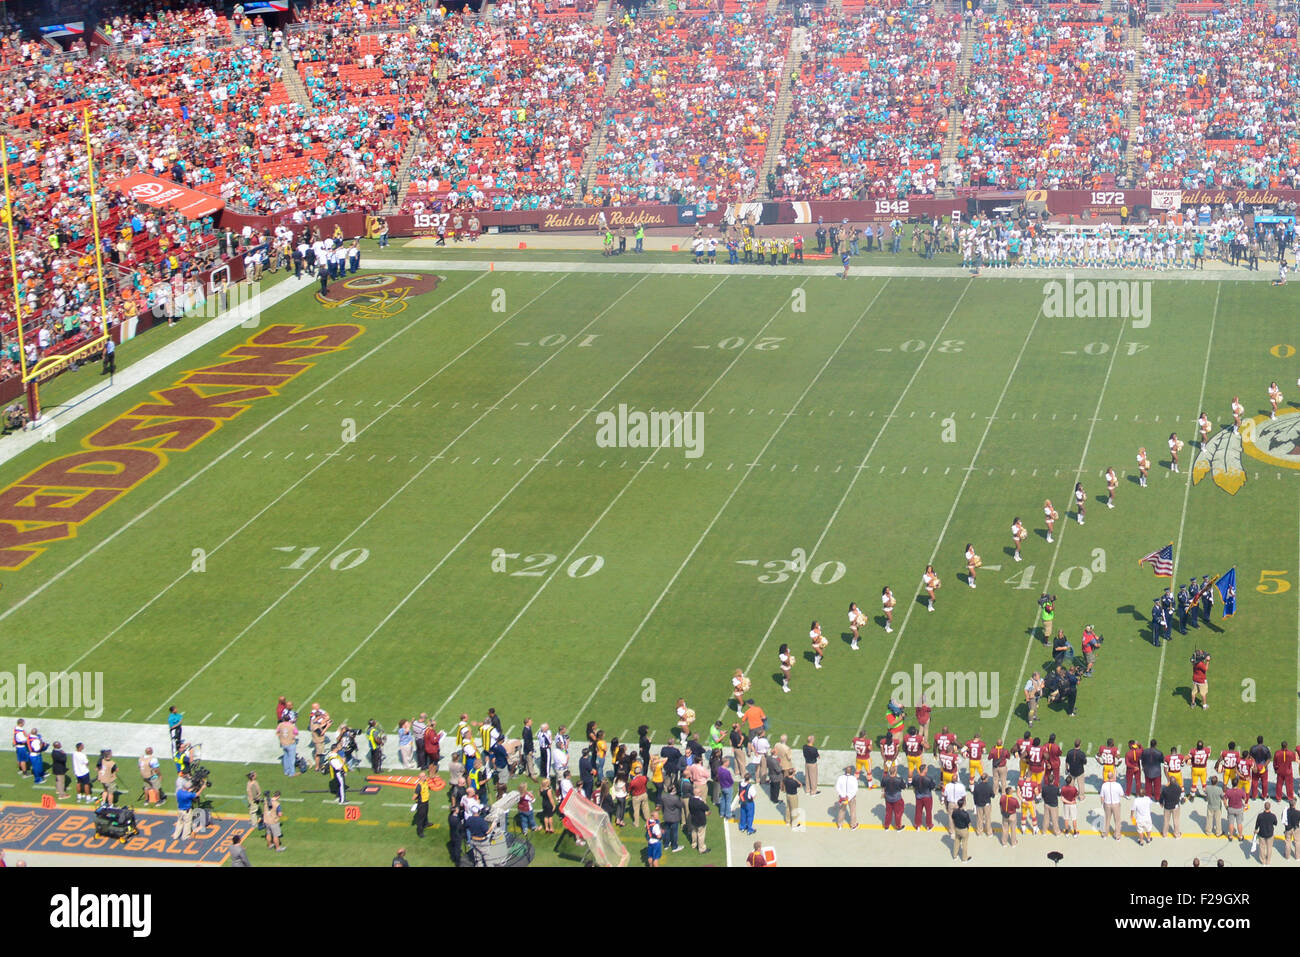 SEP 13, 2015 : The Redskins field crew mistakingly placed the 3 of the 30 yard line upside down during the season opening matchup between the Miami Dolphins and the Washington Redskins at FedEx Field in Landover, MD. The Dolphins defeated the Redskins 17-10 Stock Photo